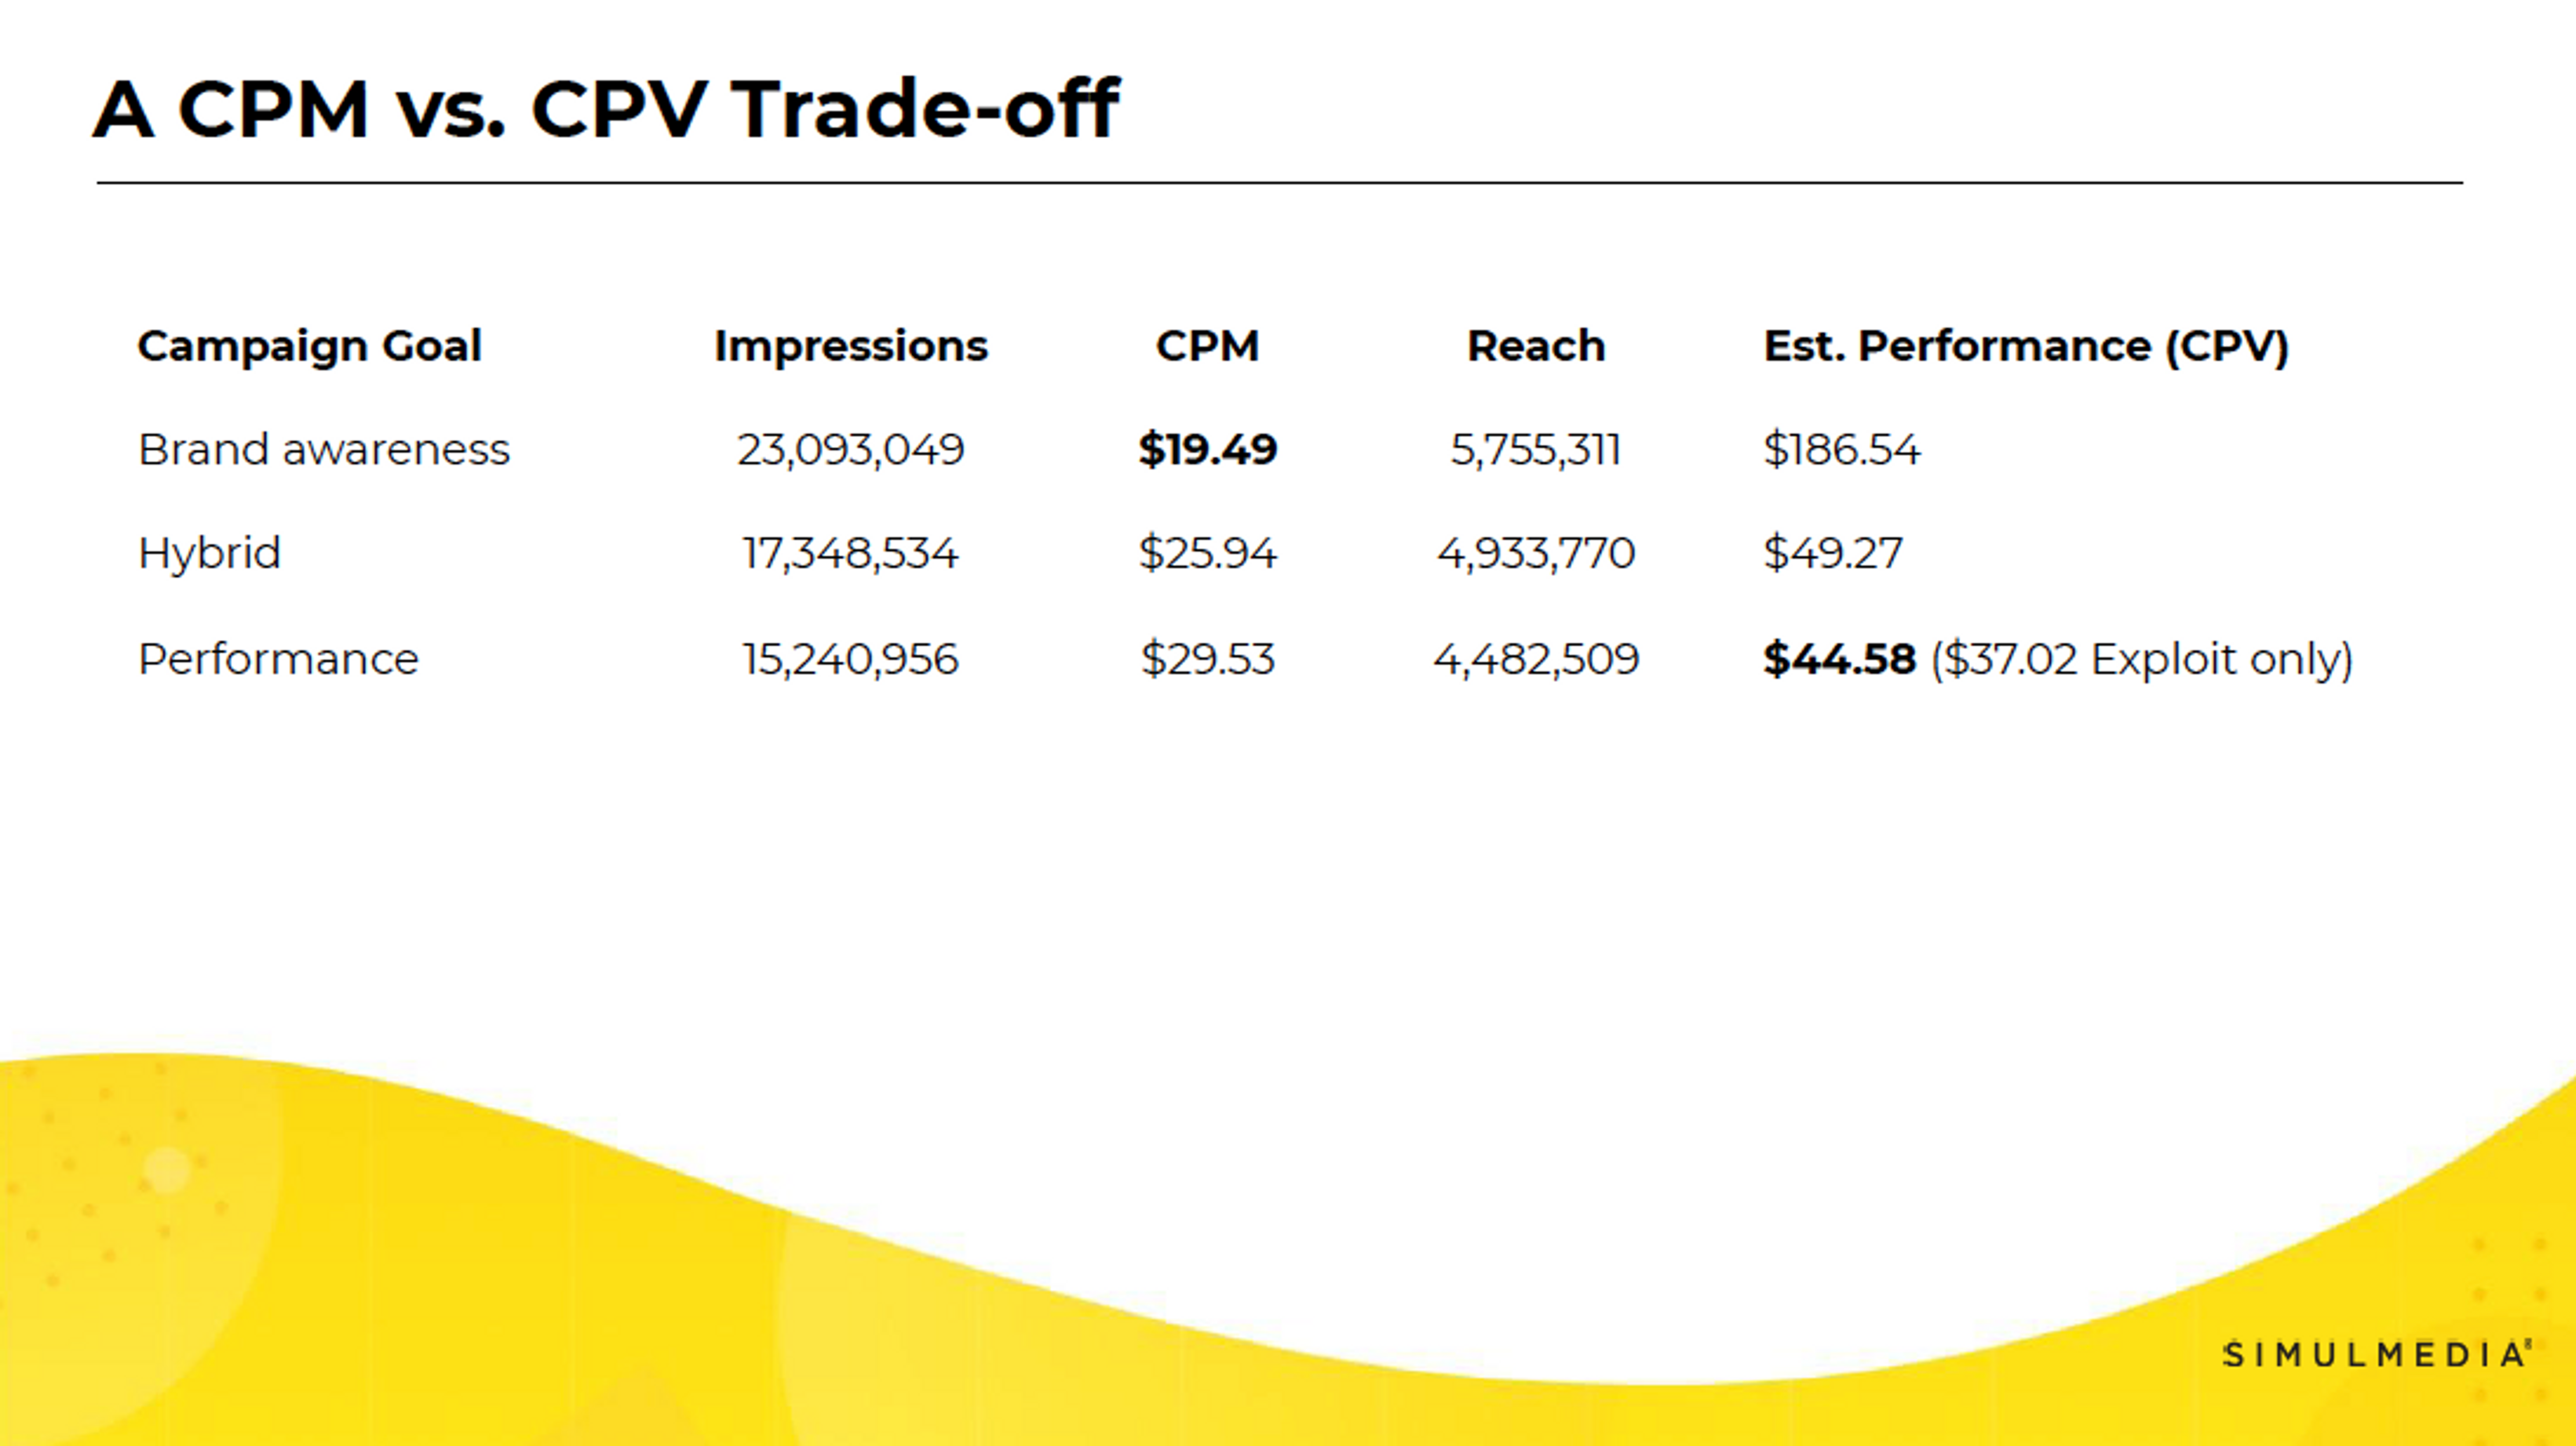 Table showing how impressions, CPM, reach, and estimated performance changes for a TV advertising campaign based on different campaign goals.